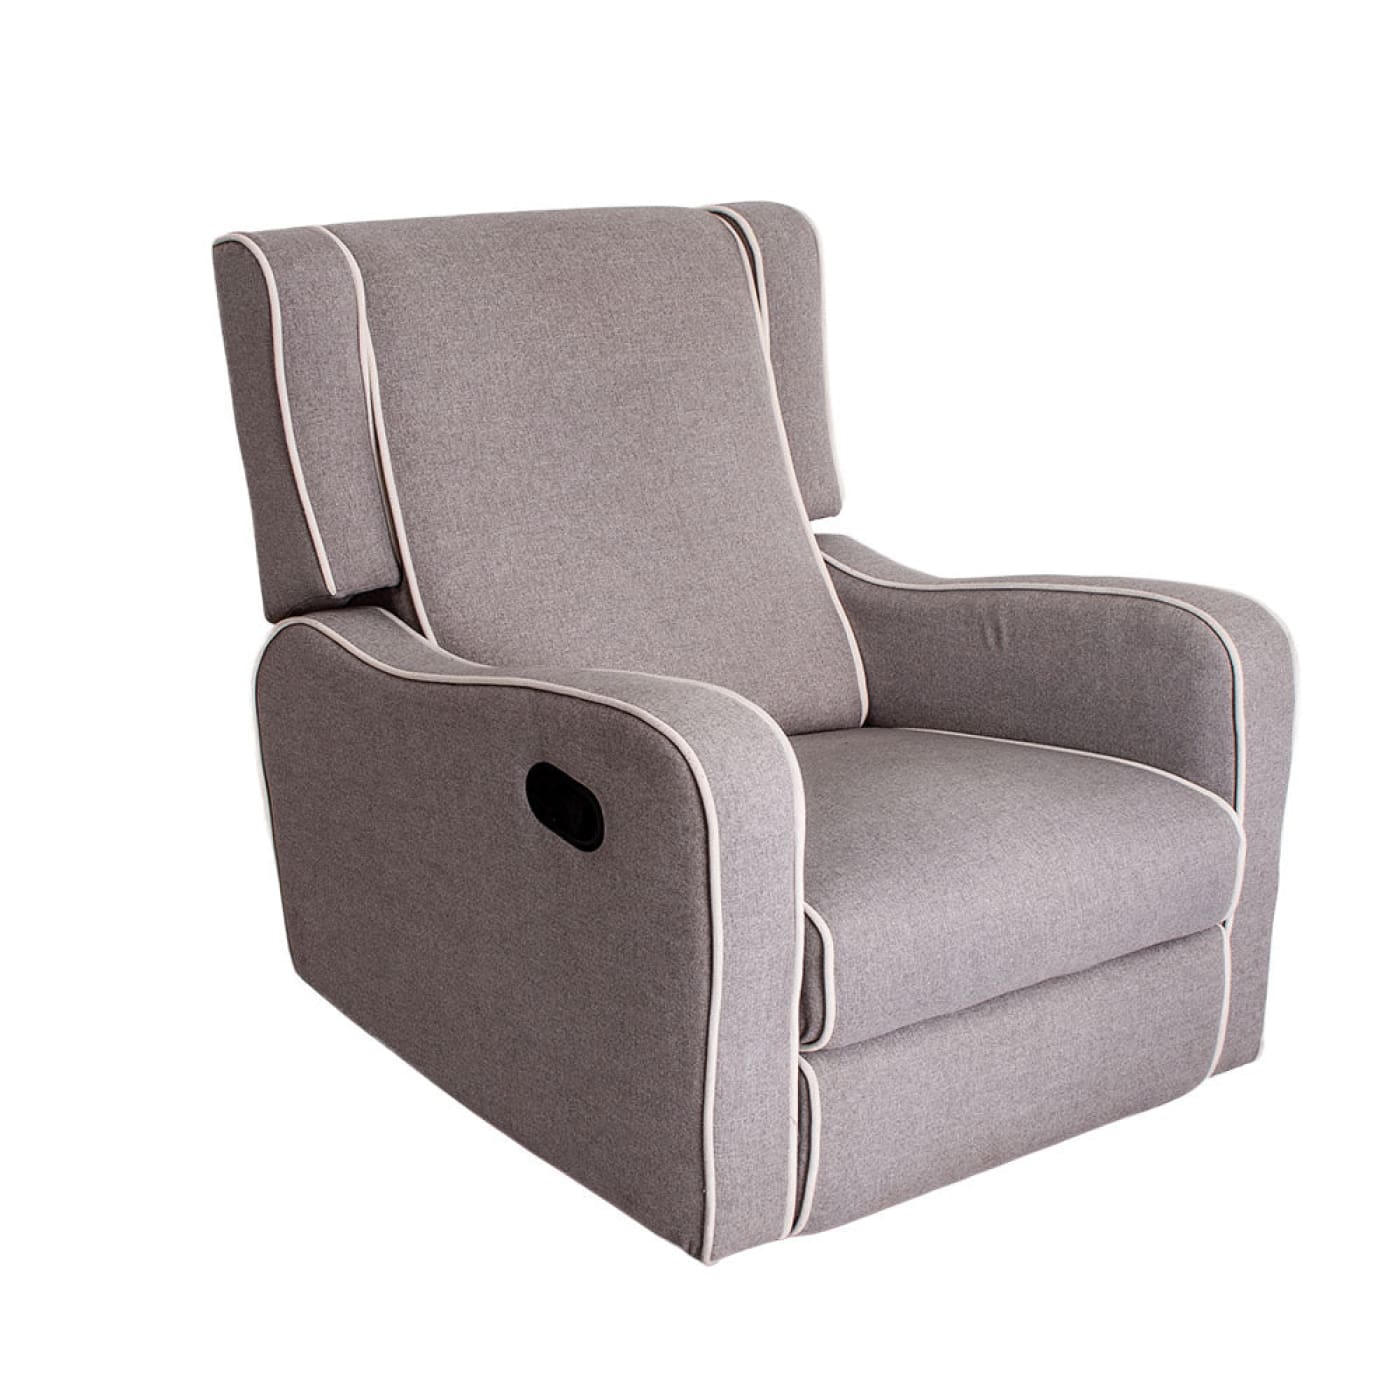 Love N Care Athena Recliner Chair - Storm - Storm - NURSERY & BEDTIME - GLIDERS/ROCKING CHAIRS